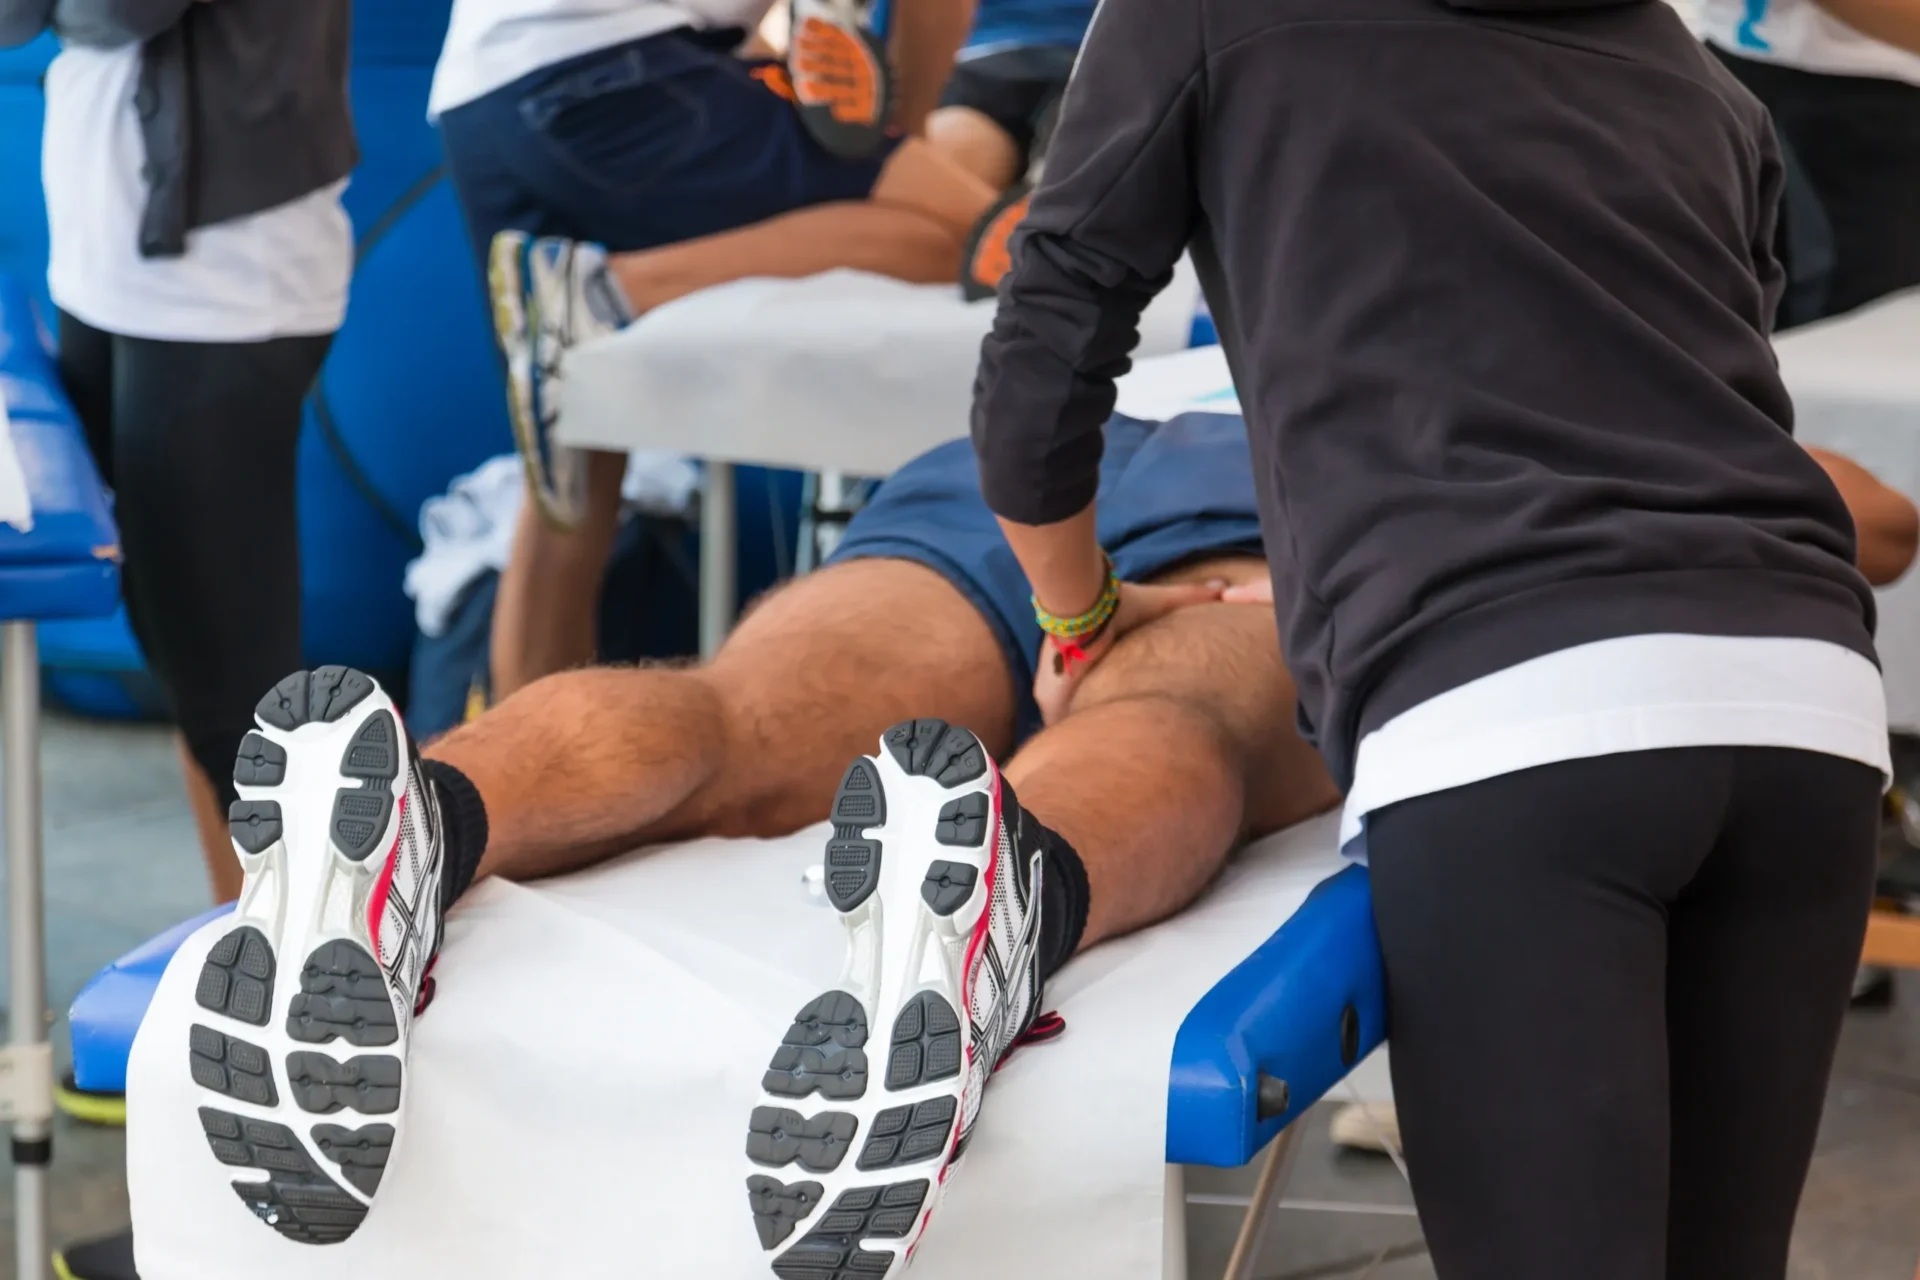 A man is getting his legs waxed by an athlete.